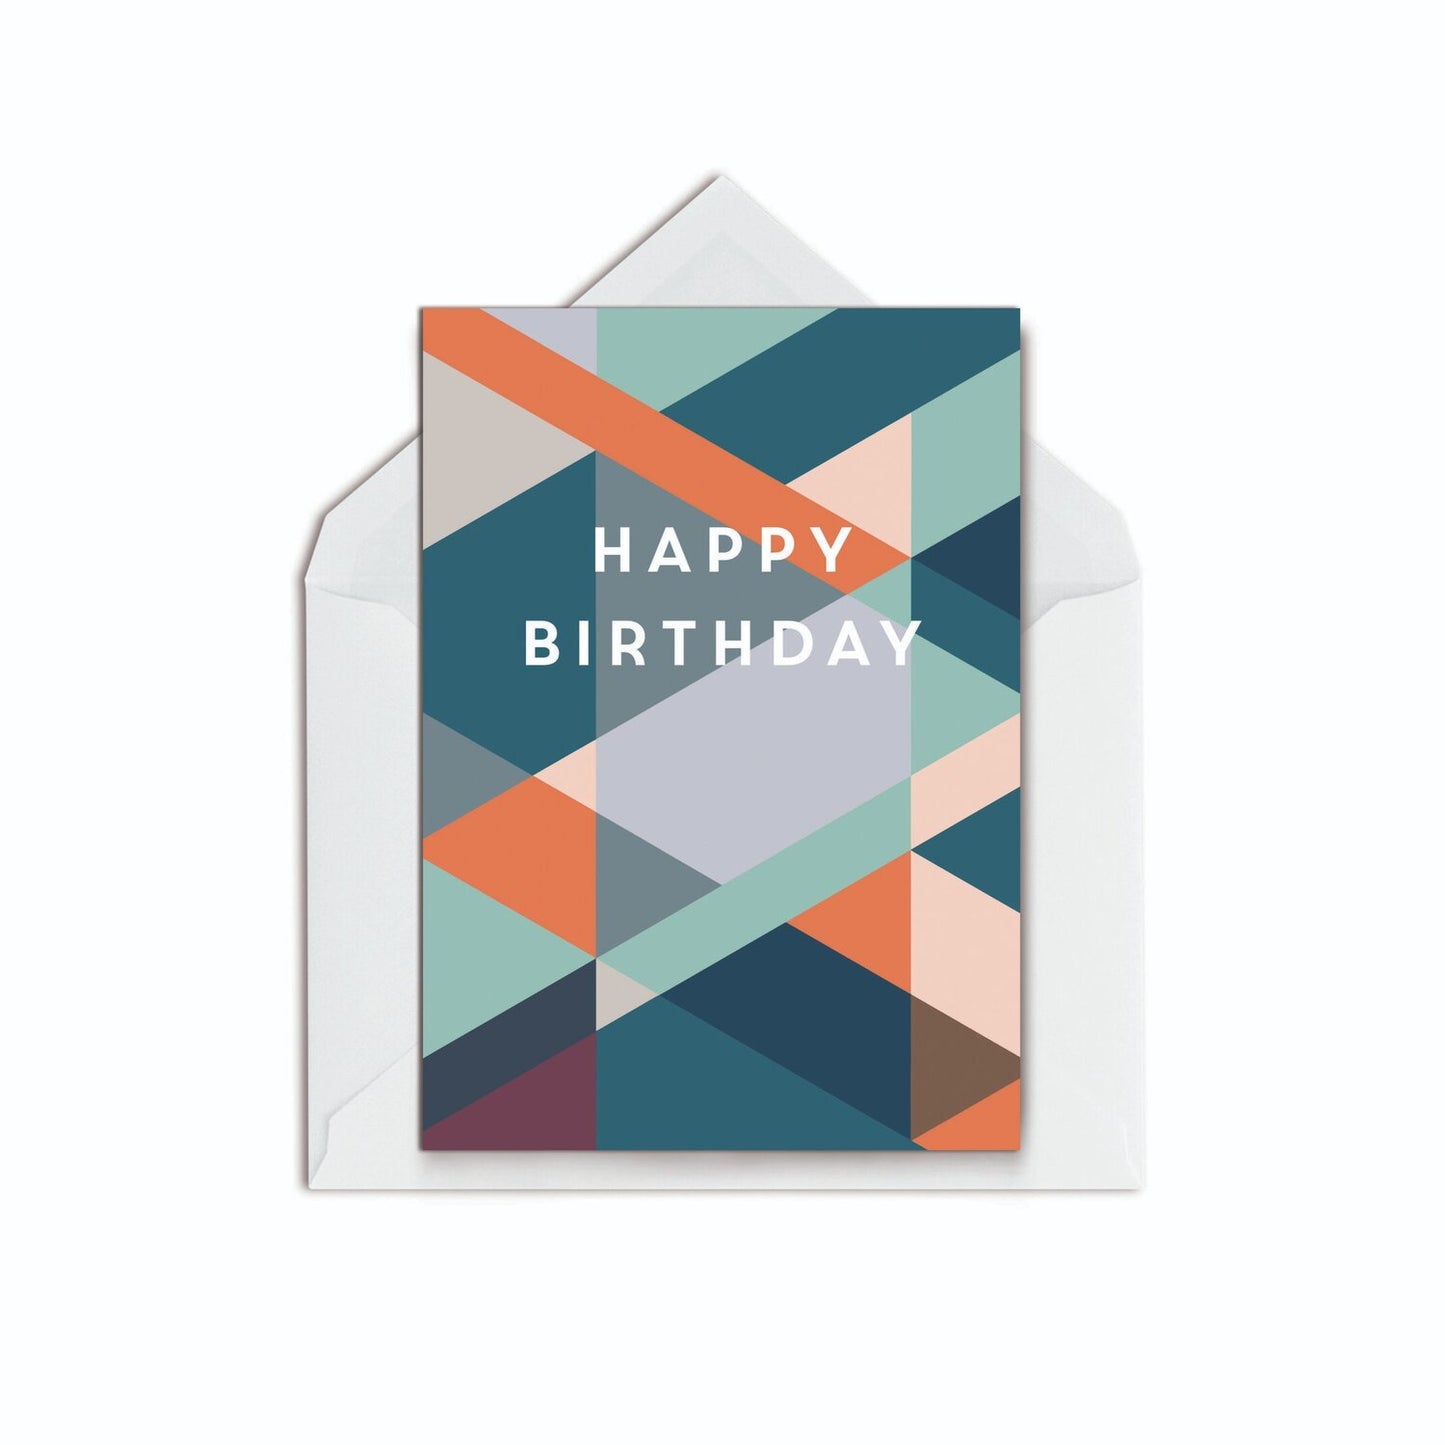 10 Birthday Cards - The Paper People Greeting Cards